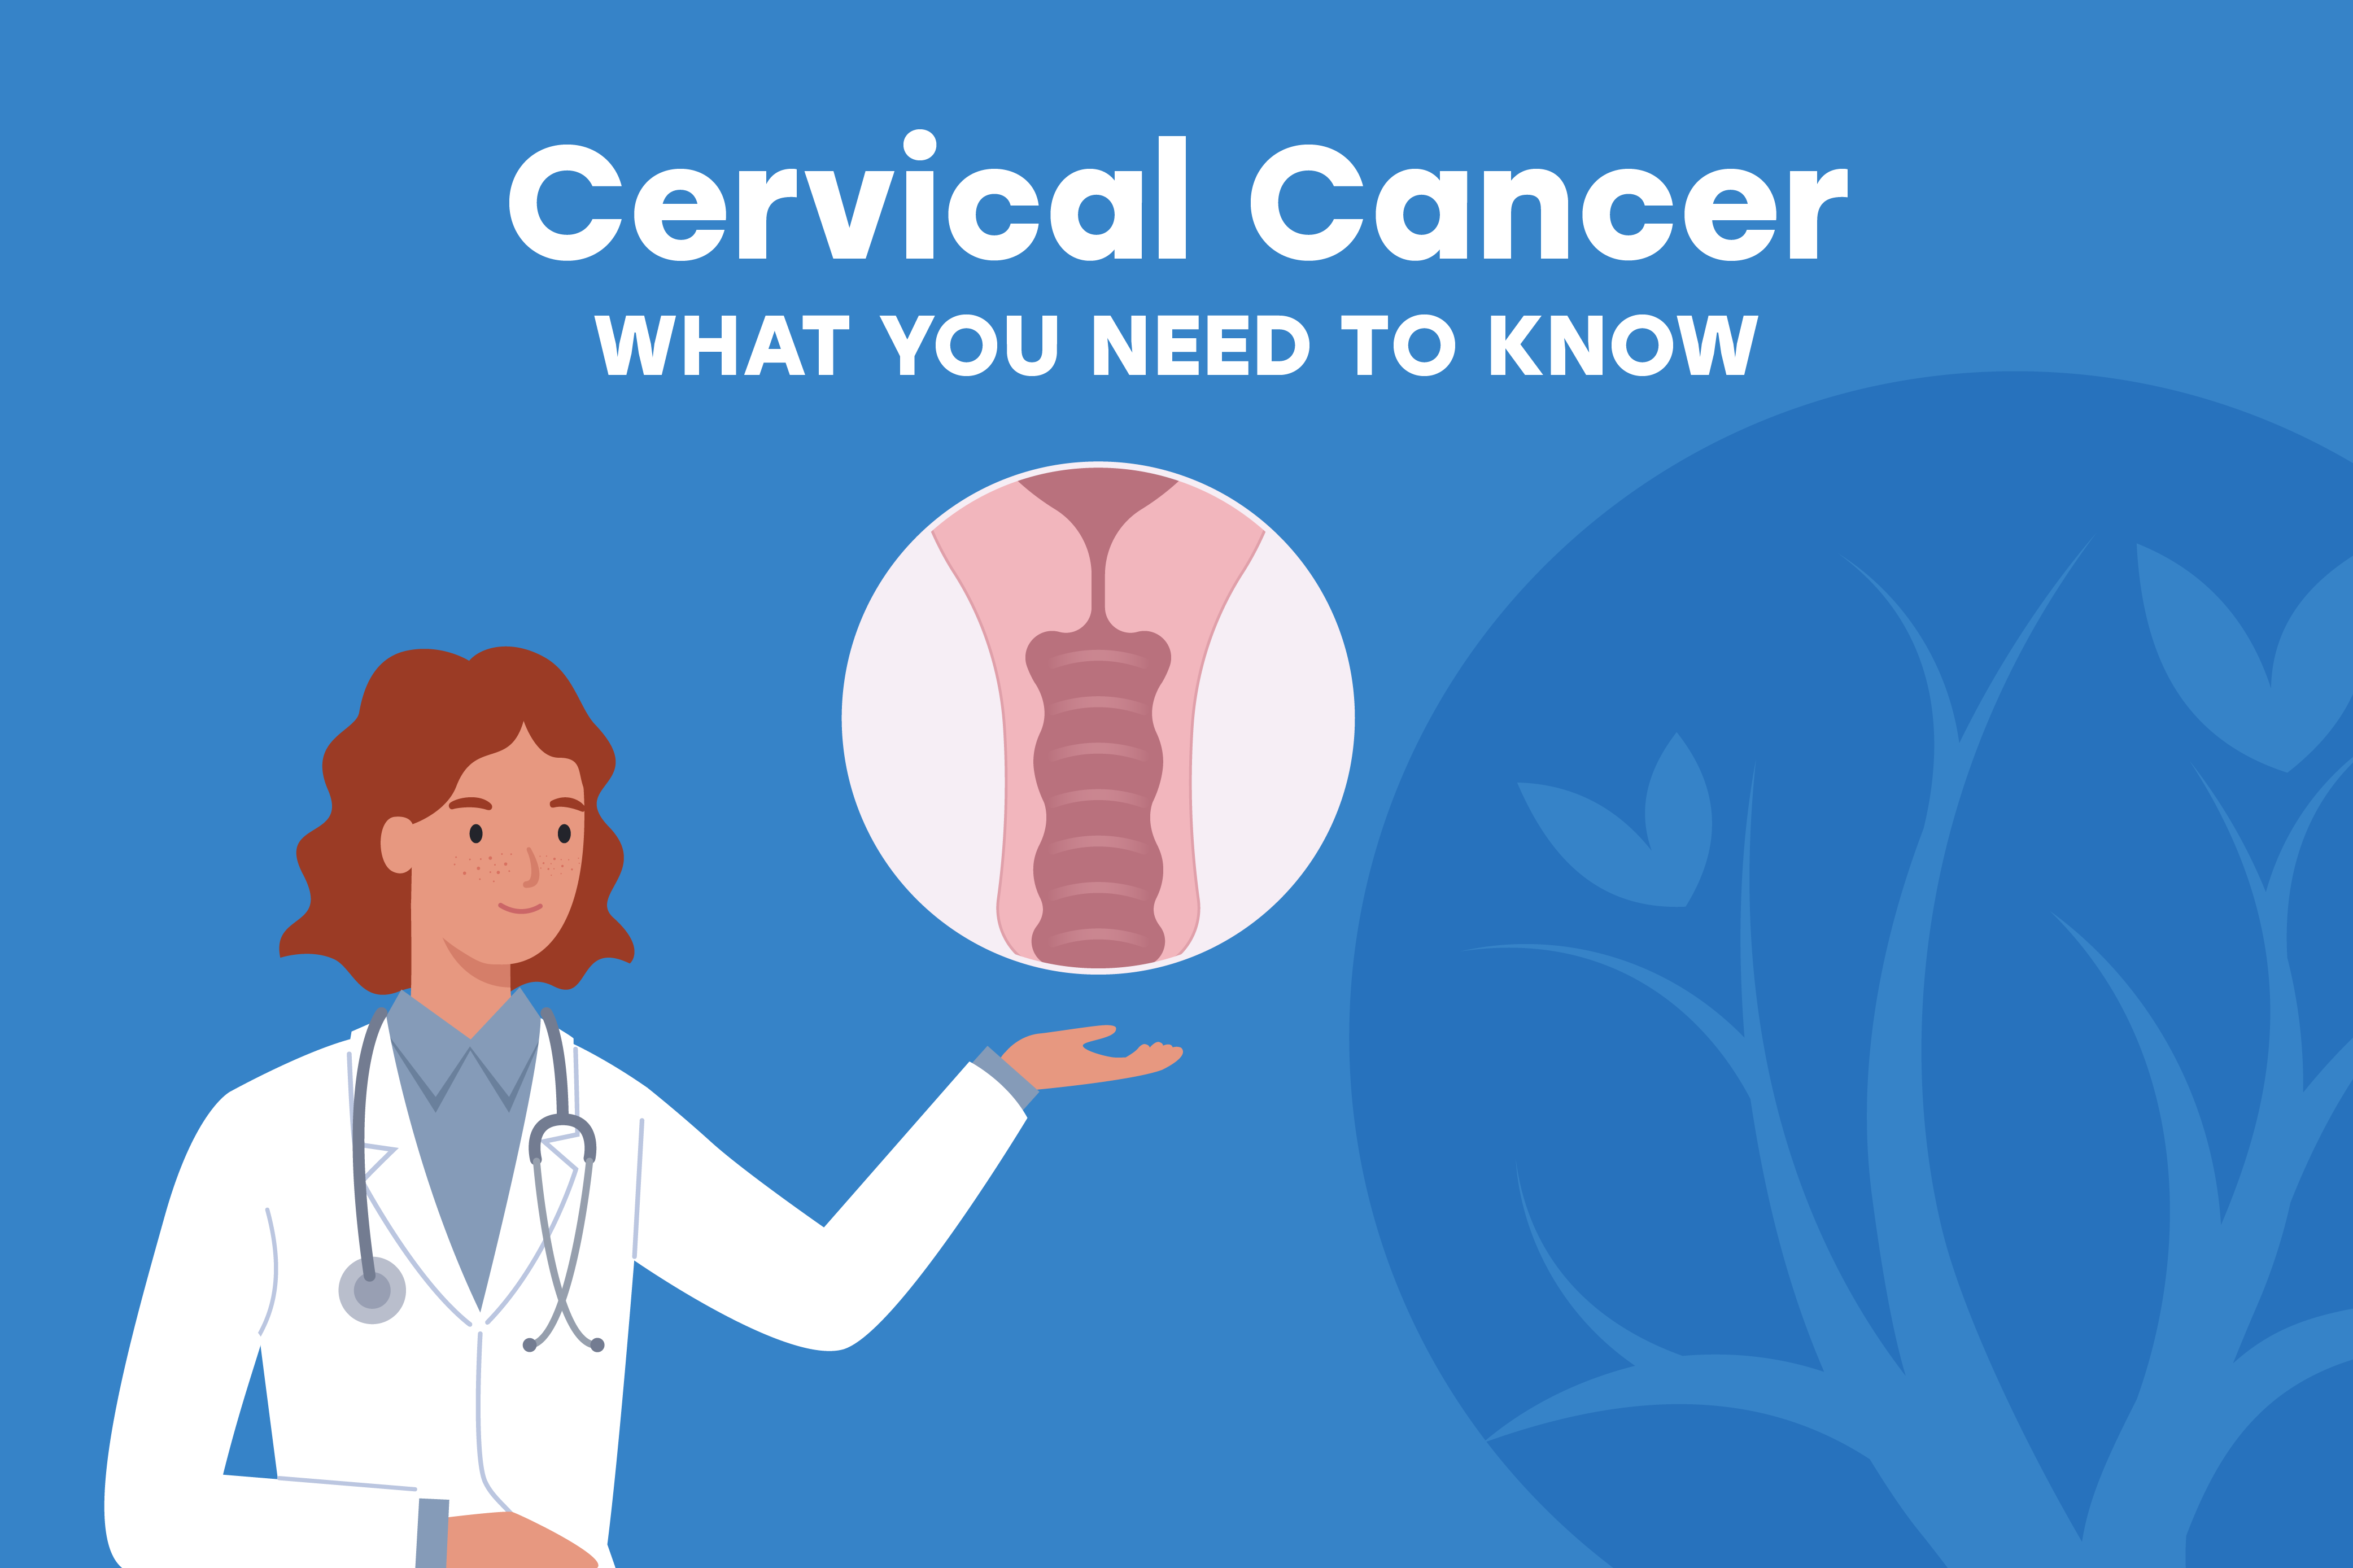 What you need to know about cervical cancer